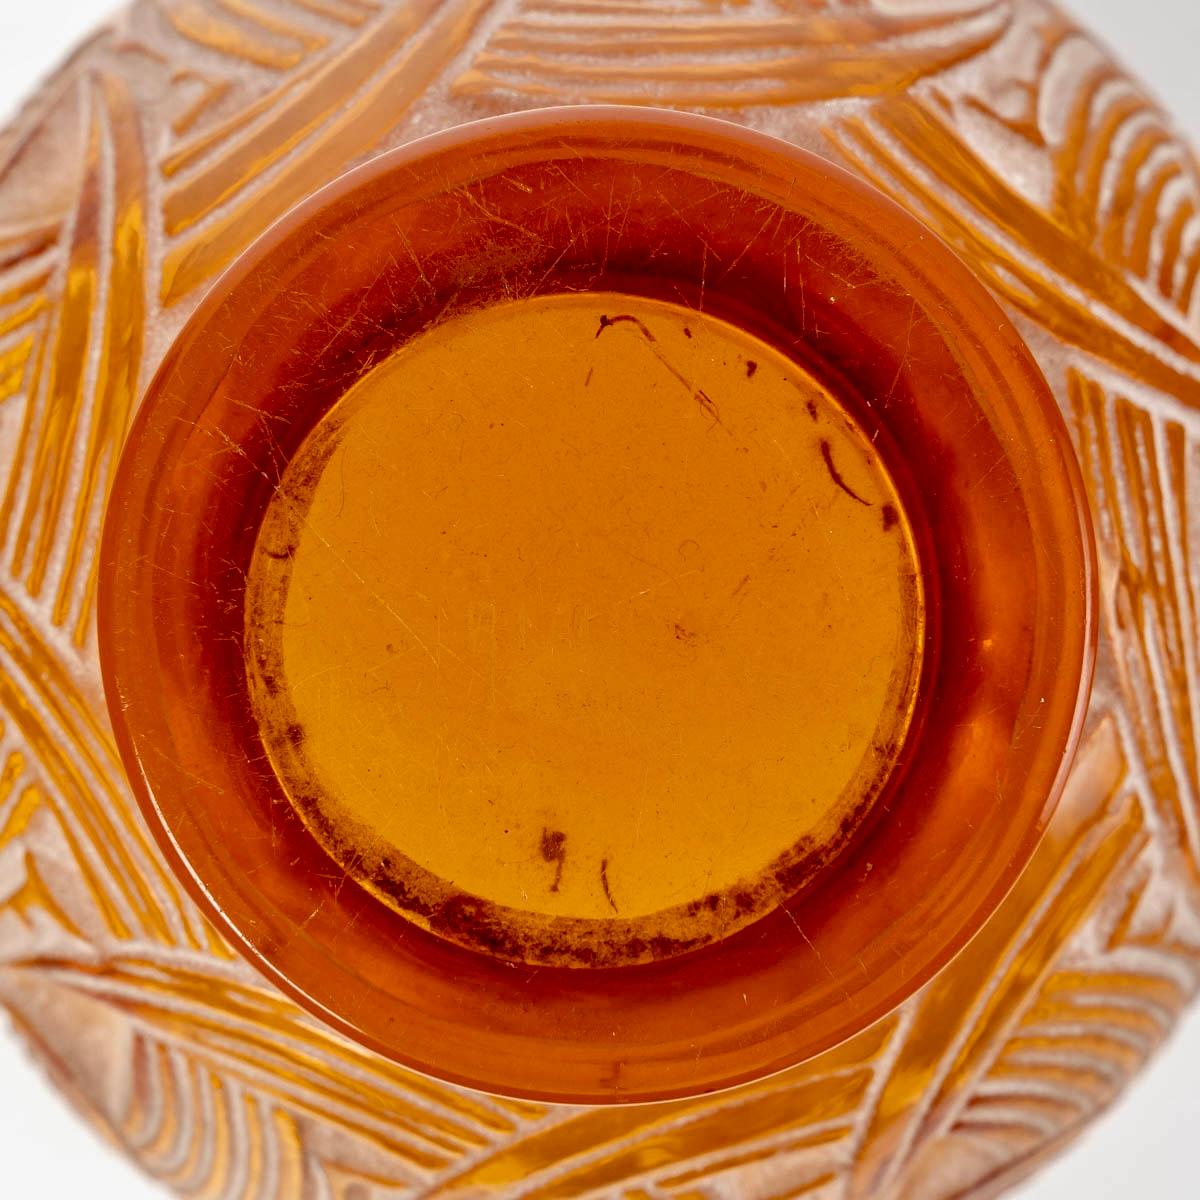 Molded 1931 René Lalique, Vase Le Mans Amber Yellow Glass with Beige Patina